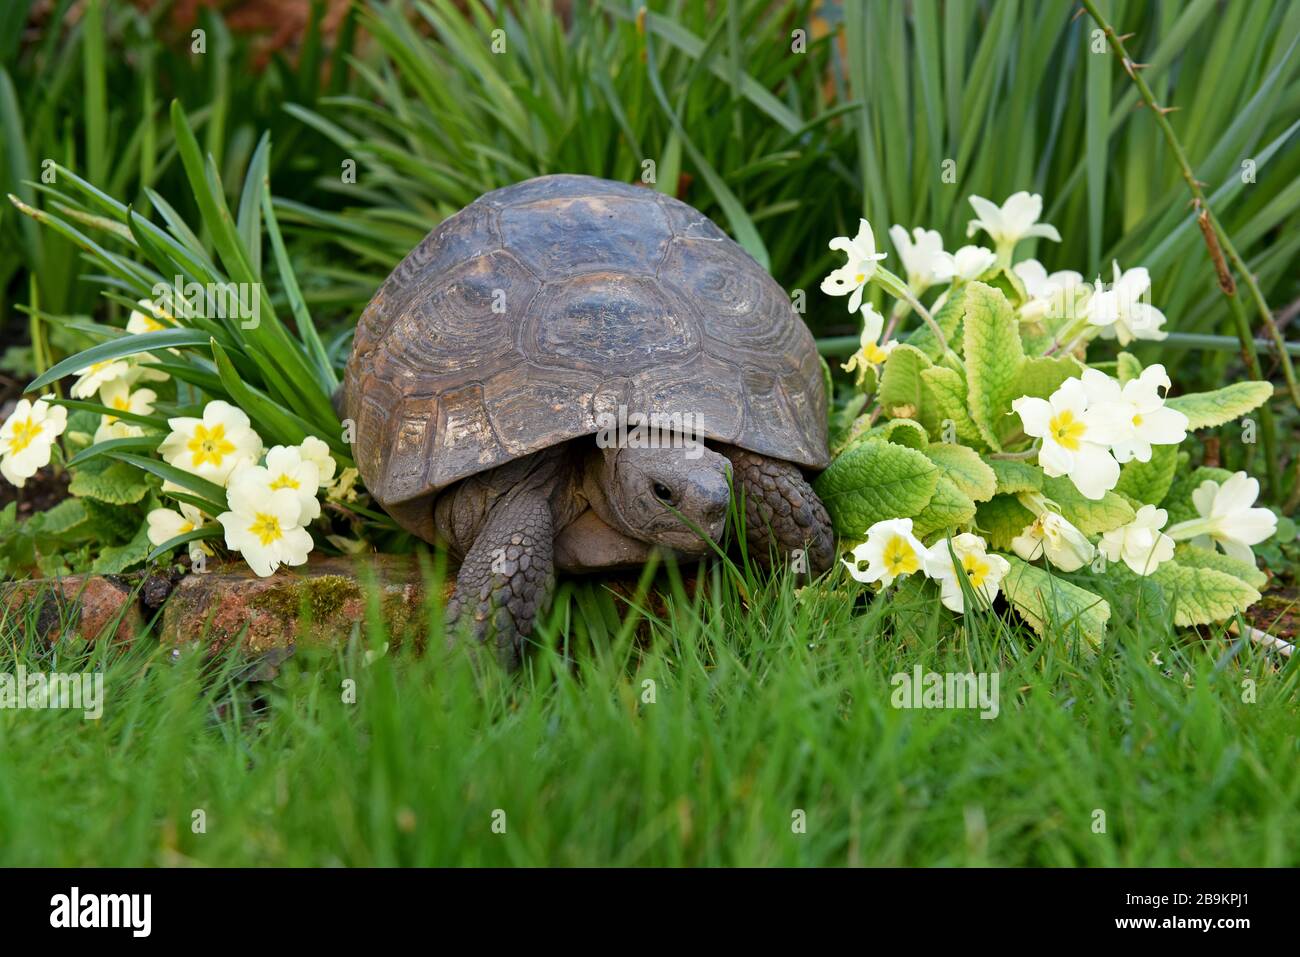 Telford, Shropshire, Uk. March 24th 2020 While people in the Uk are are going into lockdown and self isolation this old lady is doing the opposite, Freda the tortoise is well over 100 years old and has just woken up after self hibernating for six months in the garden she has lived in for 50 years. She always buries herself underground in late October and wakes in late March providing the weather is sunny. Credit: David Bagnall/Alamy Live News Stock Photo